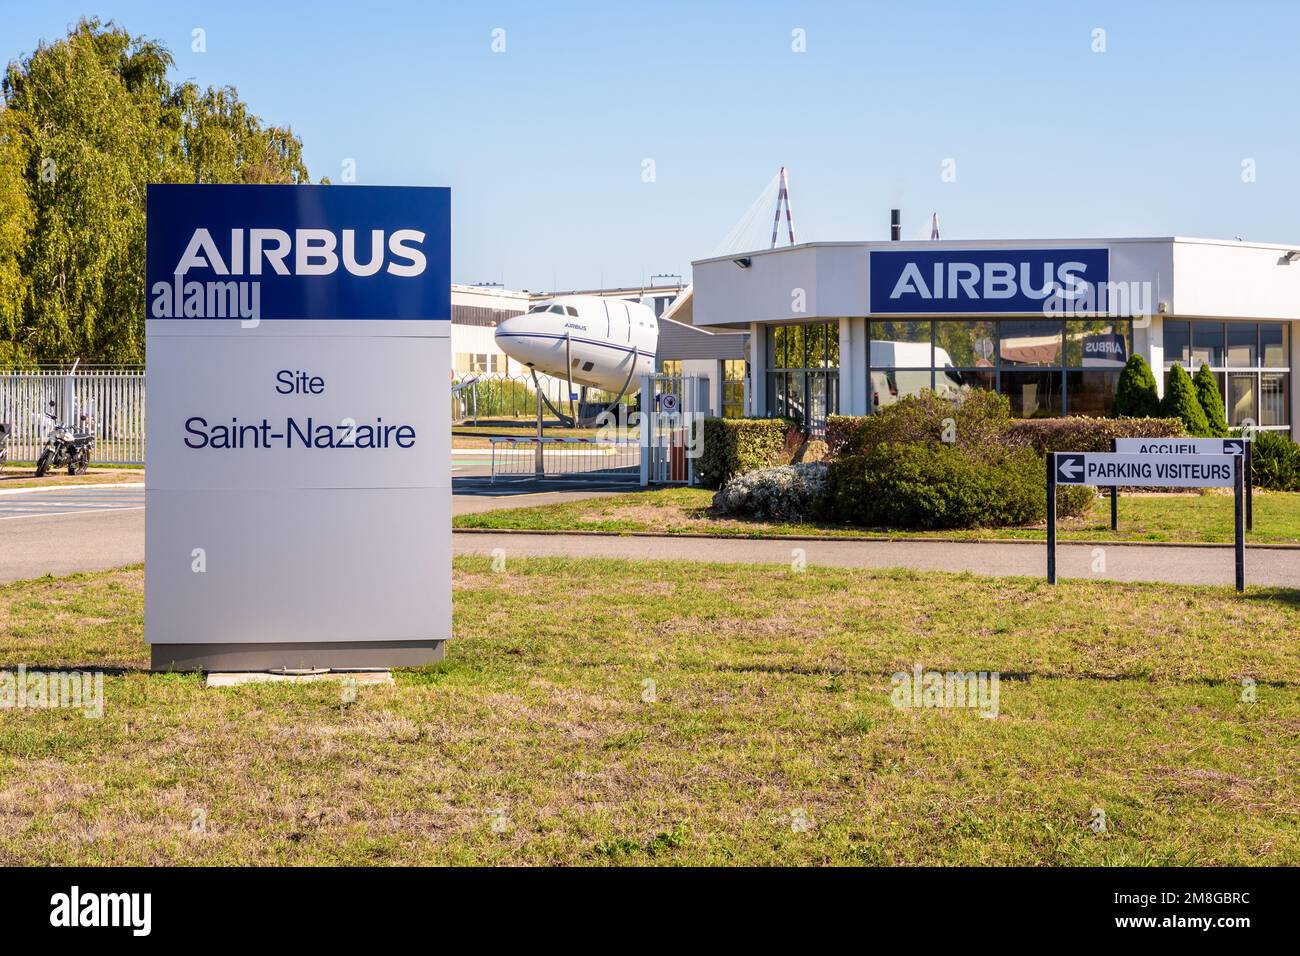 Entrance of the Airbus Atlantic site in Saint-Nazaire, France which resulted from the merger between Stelia Aerospace and the Airbus factories. Stock Photo